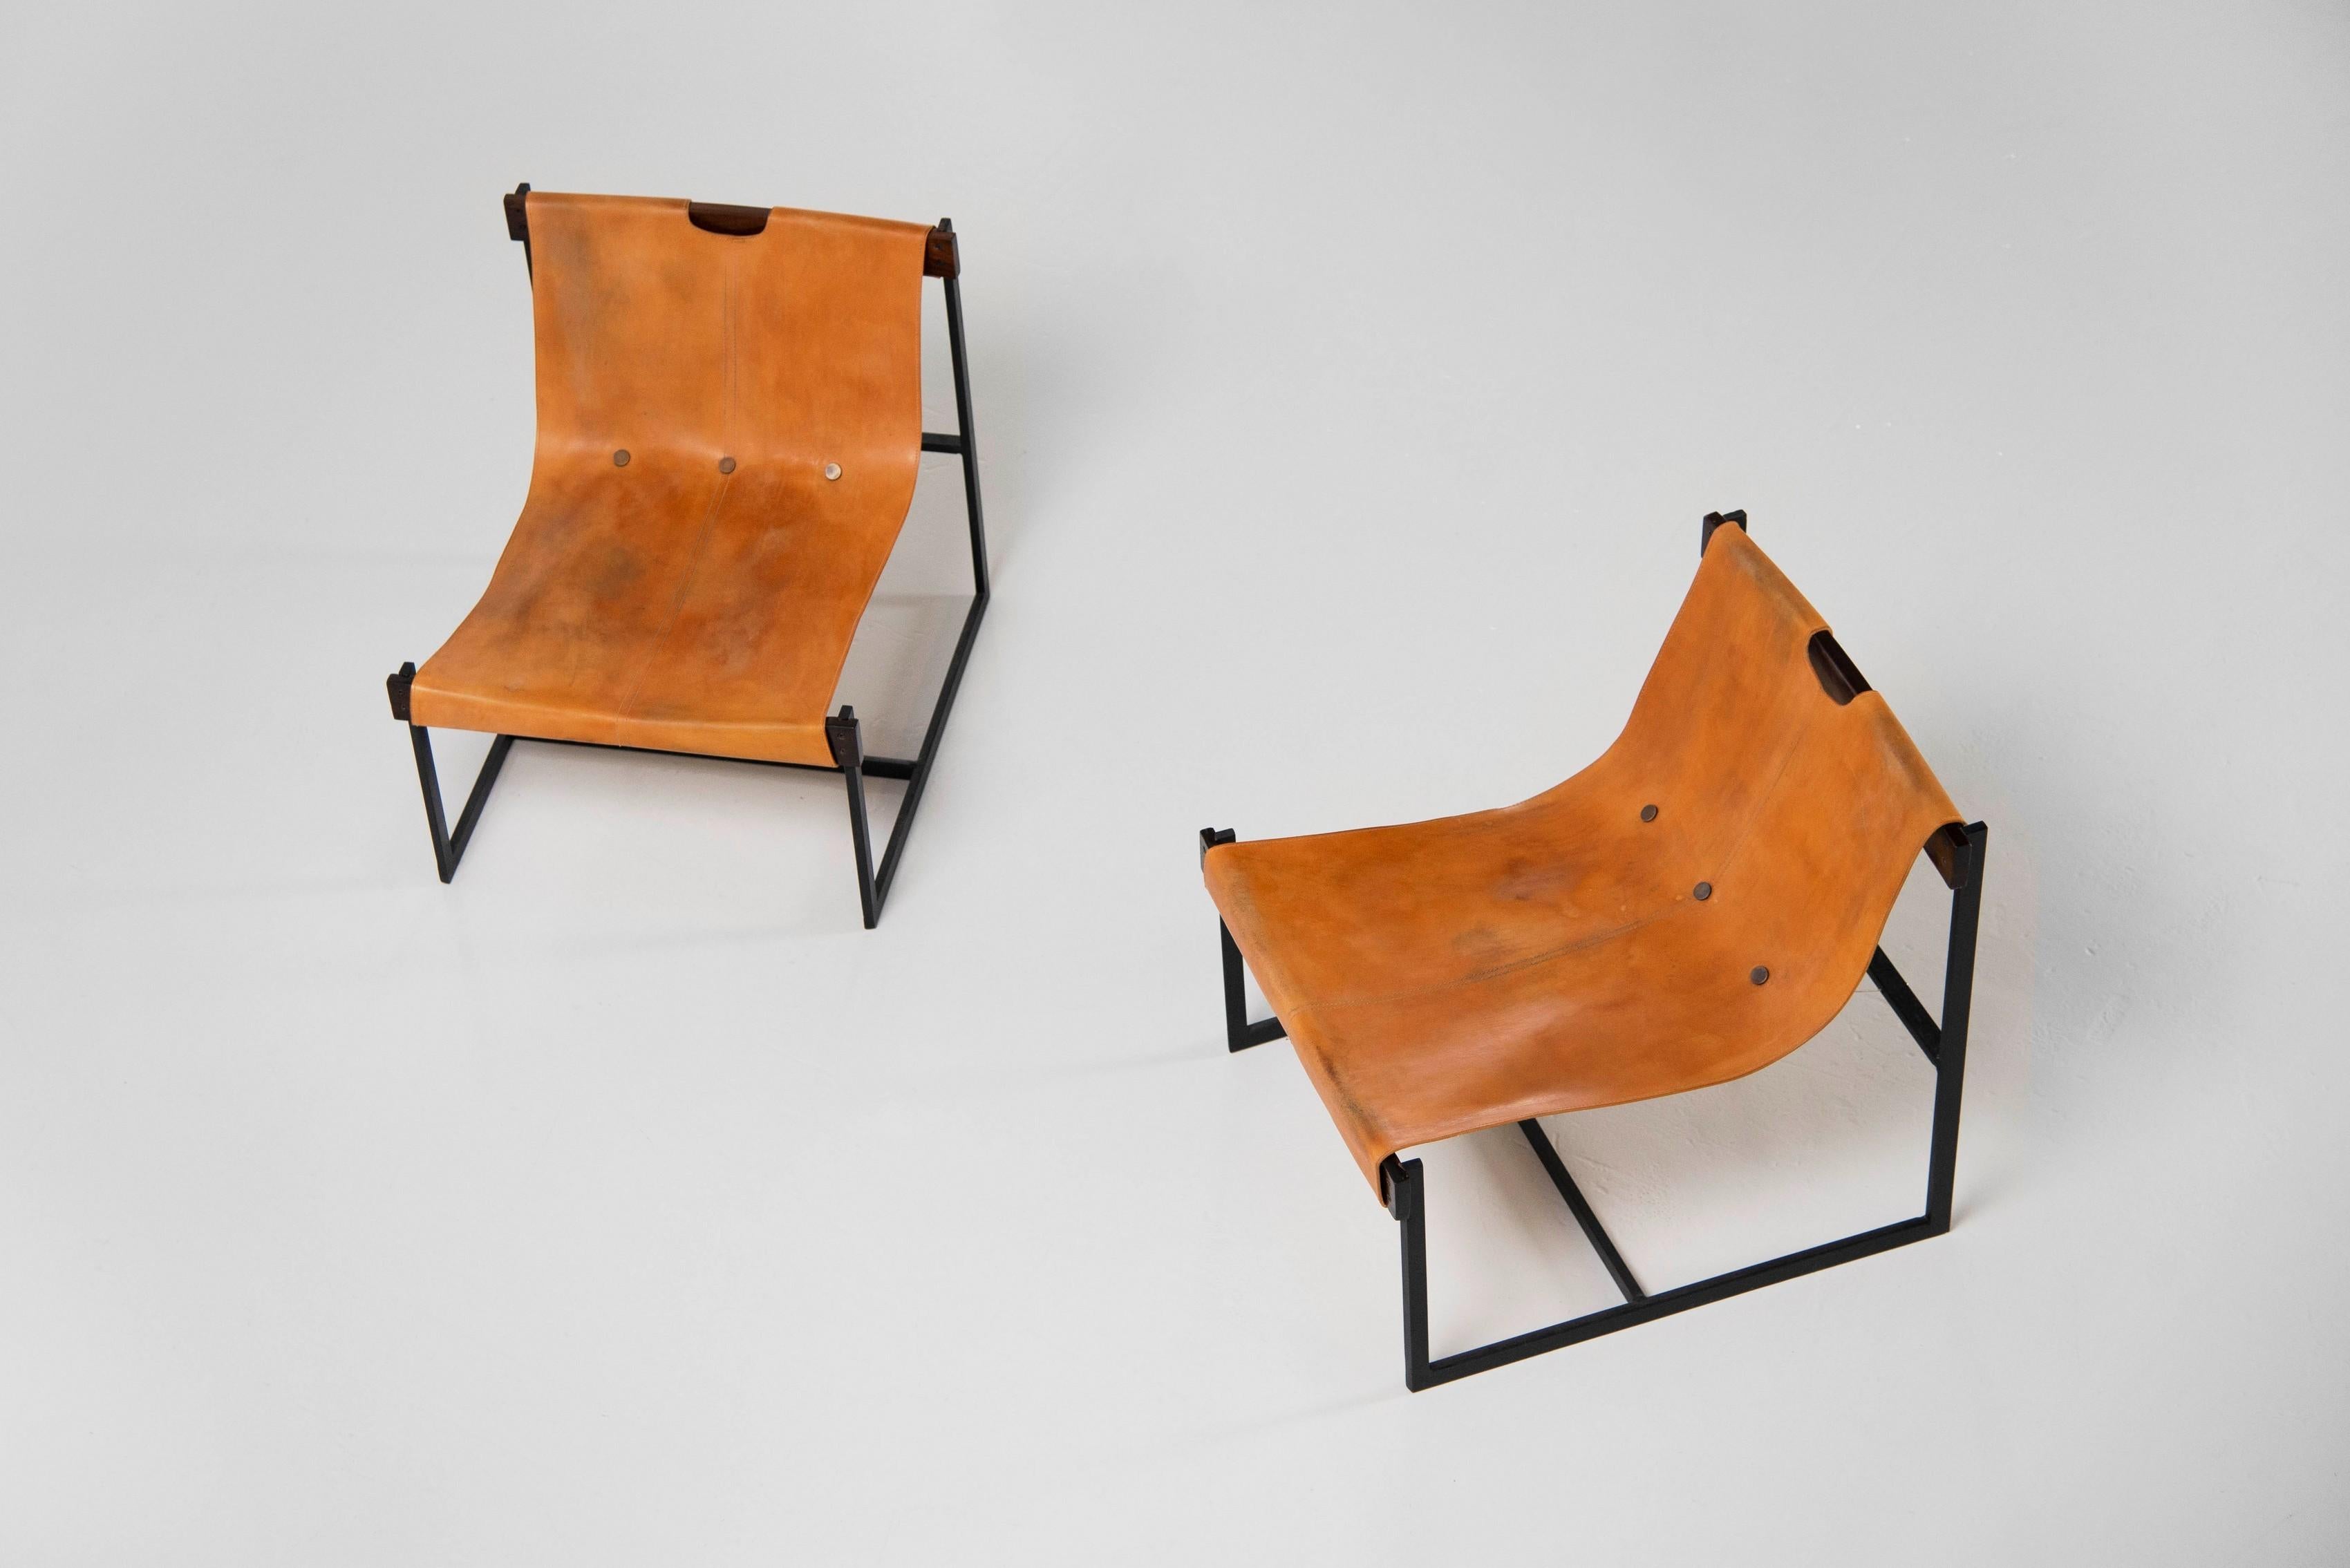 Cold-Painted Julio Roberto Katinsky Sling Chairs, Brazil, 1959 For Sale